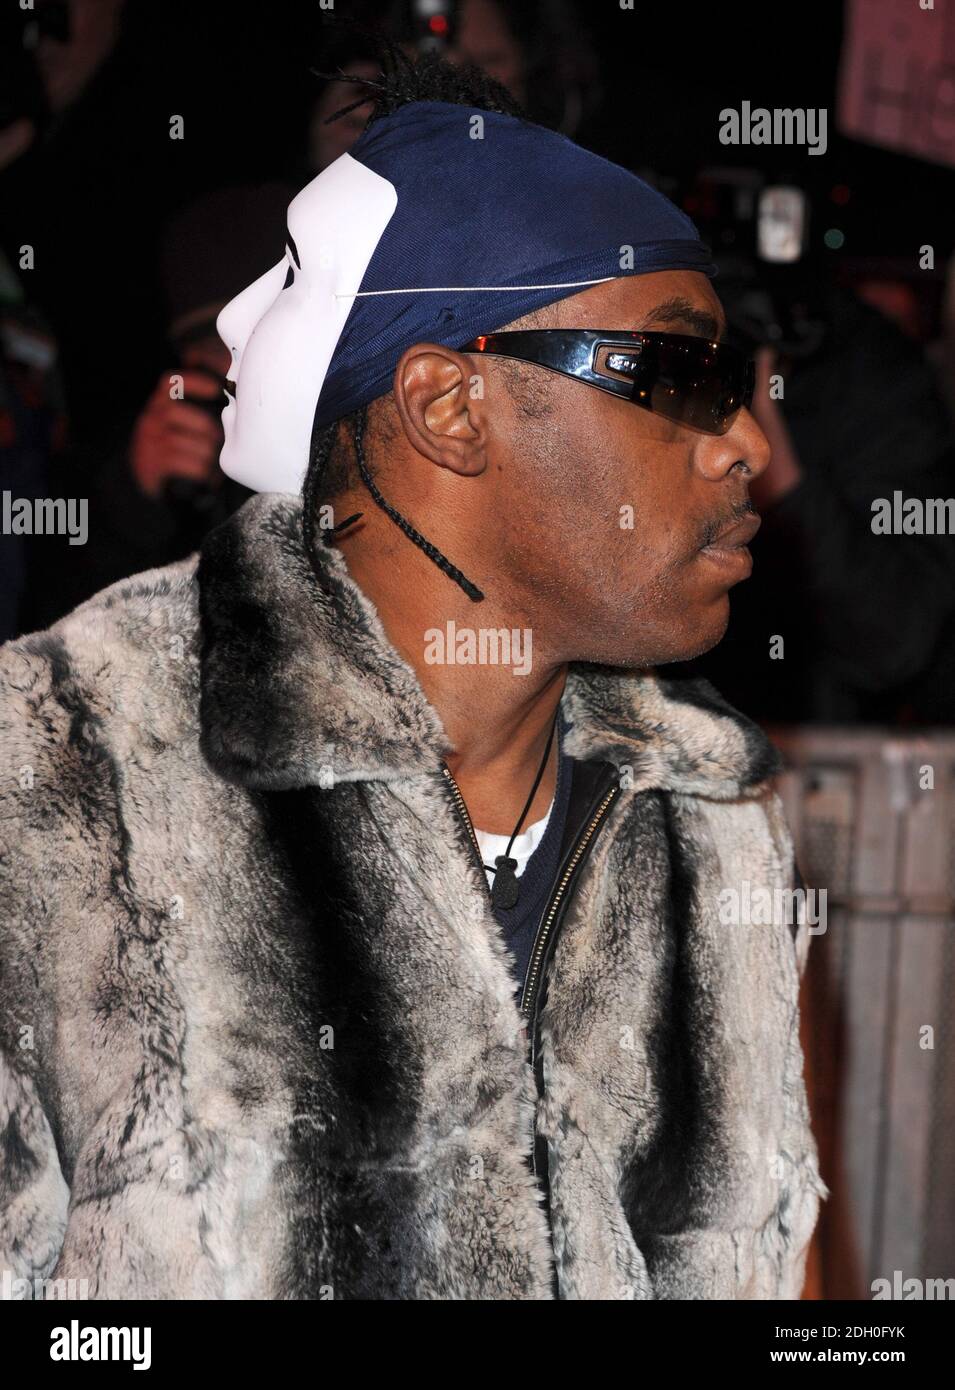 Coolio arrives to enter the Celebrity Big Brother house at Elstree Studios in Borehamwood, Hertfordshire. Stock Photo